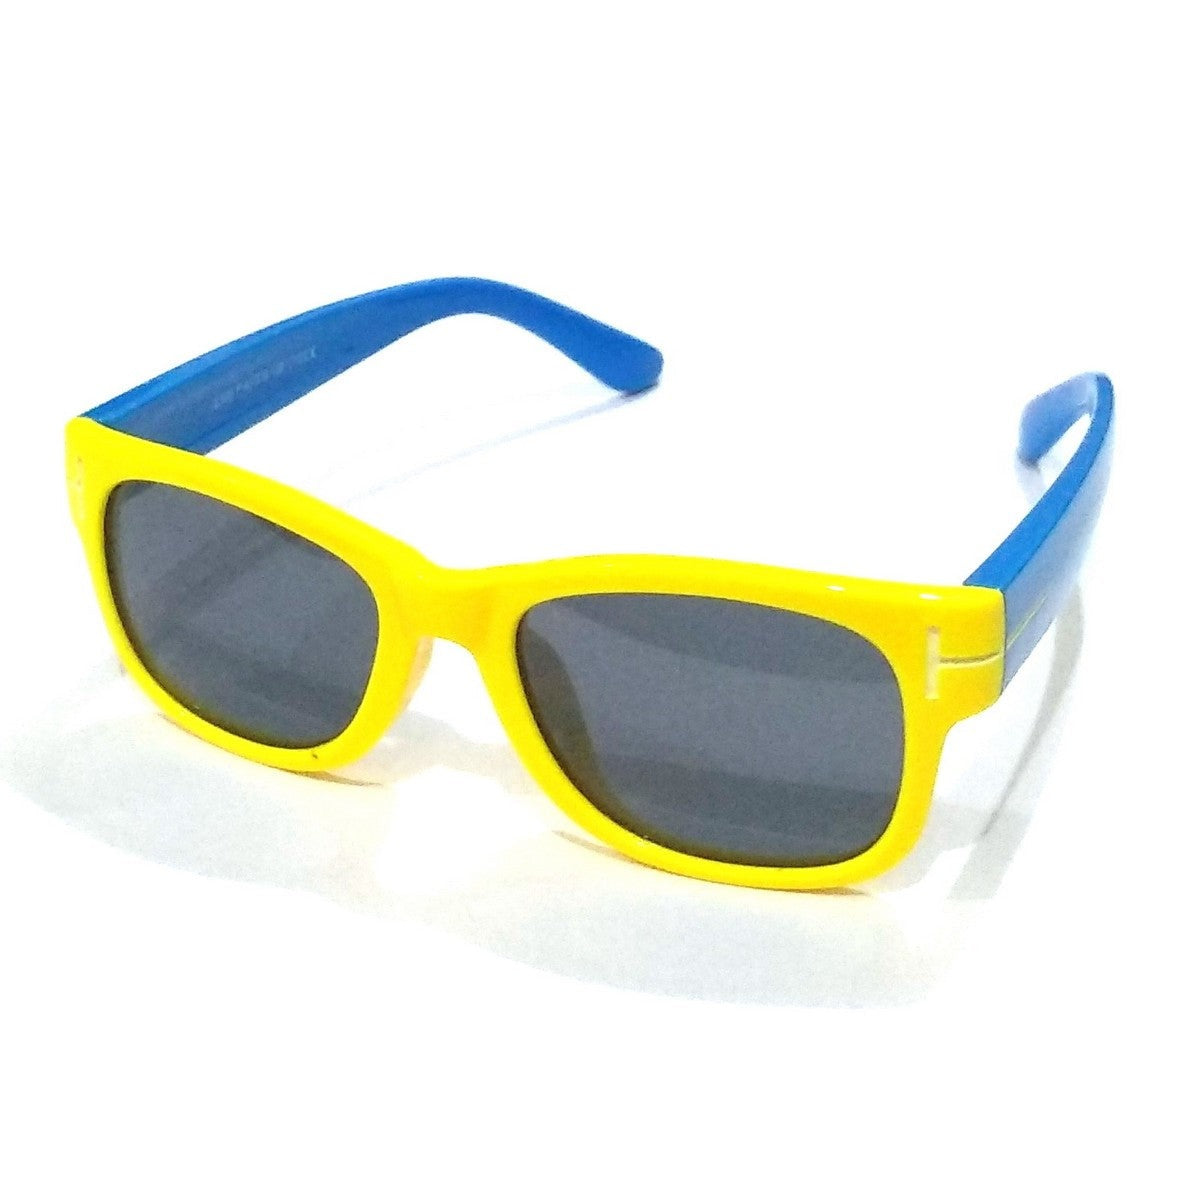 Unbreakable Kids Polarized Sunglasses Light Weight TR Material S899YellowBlue